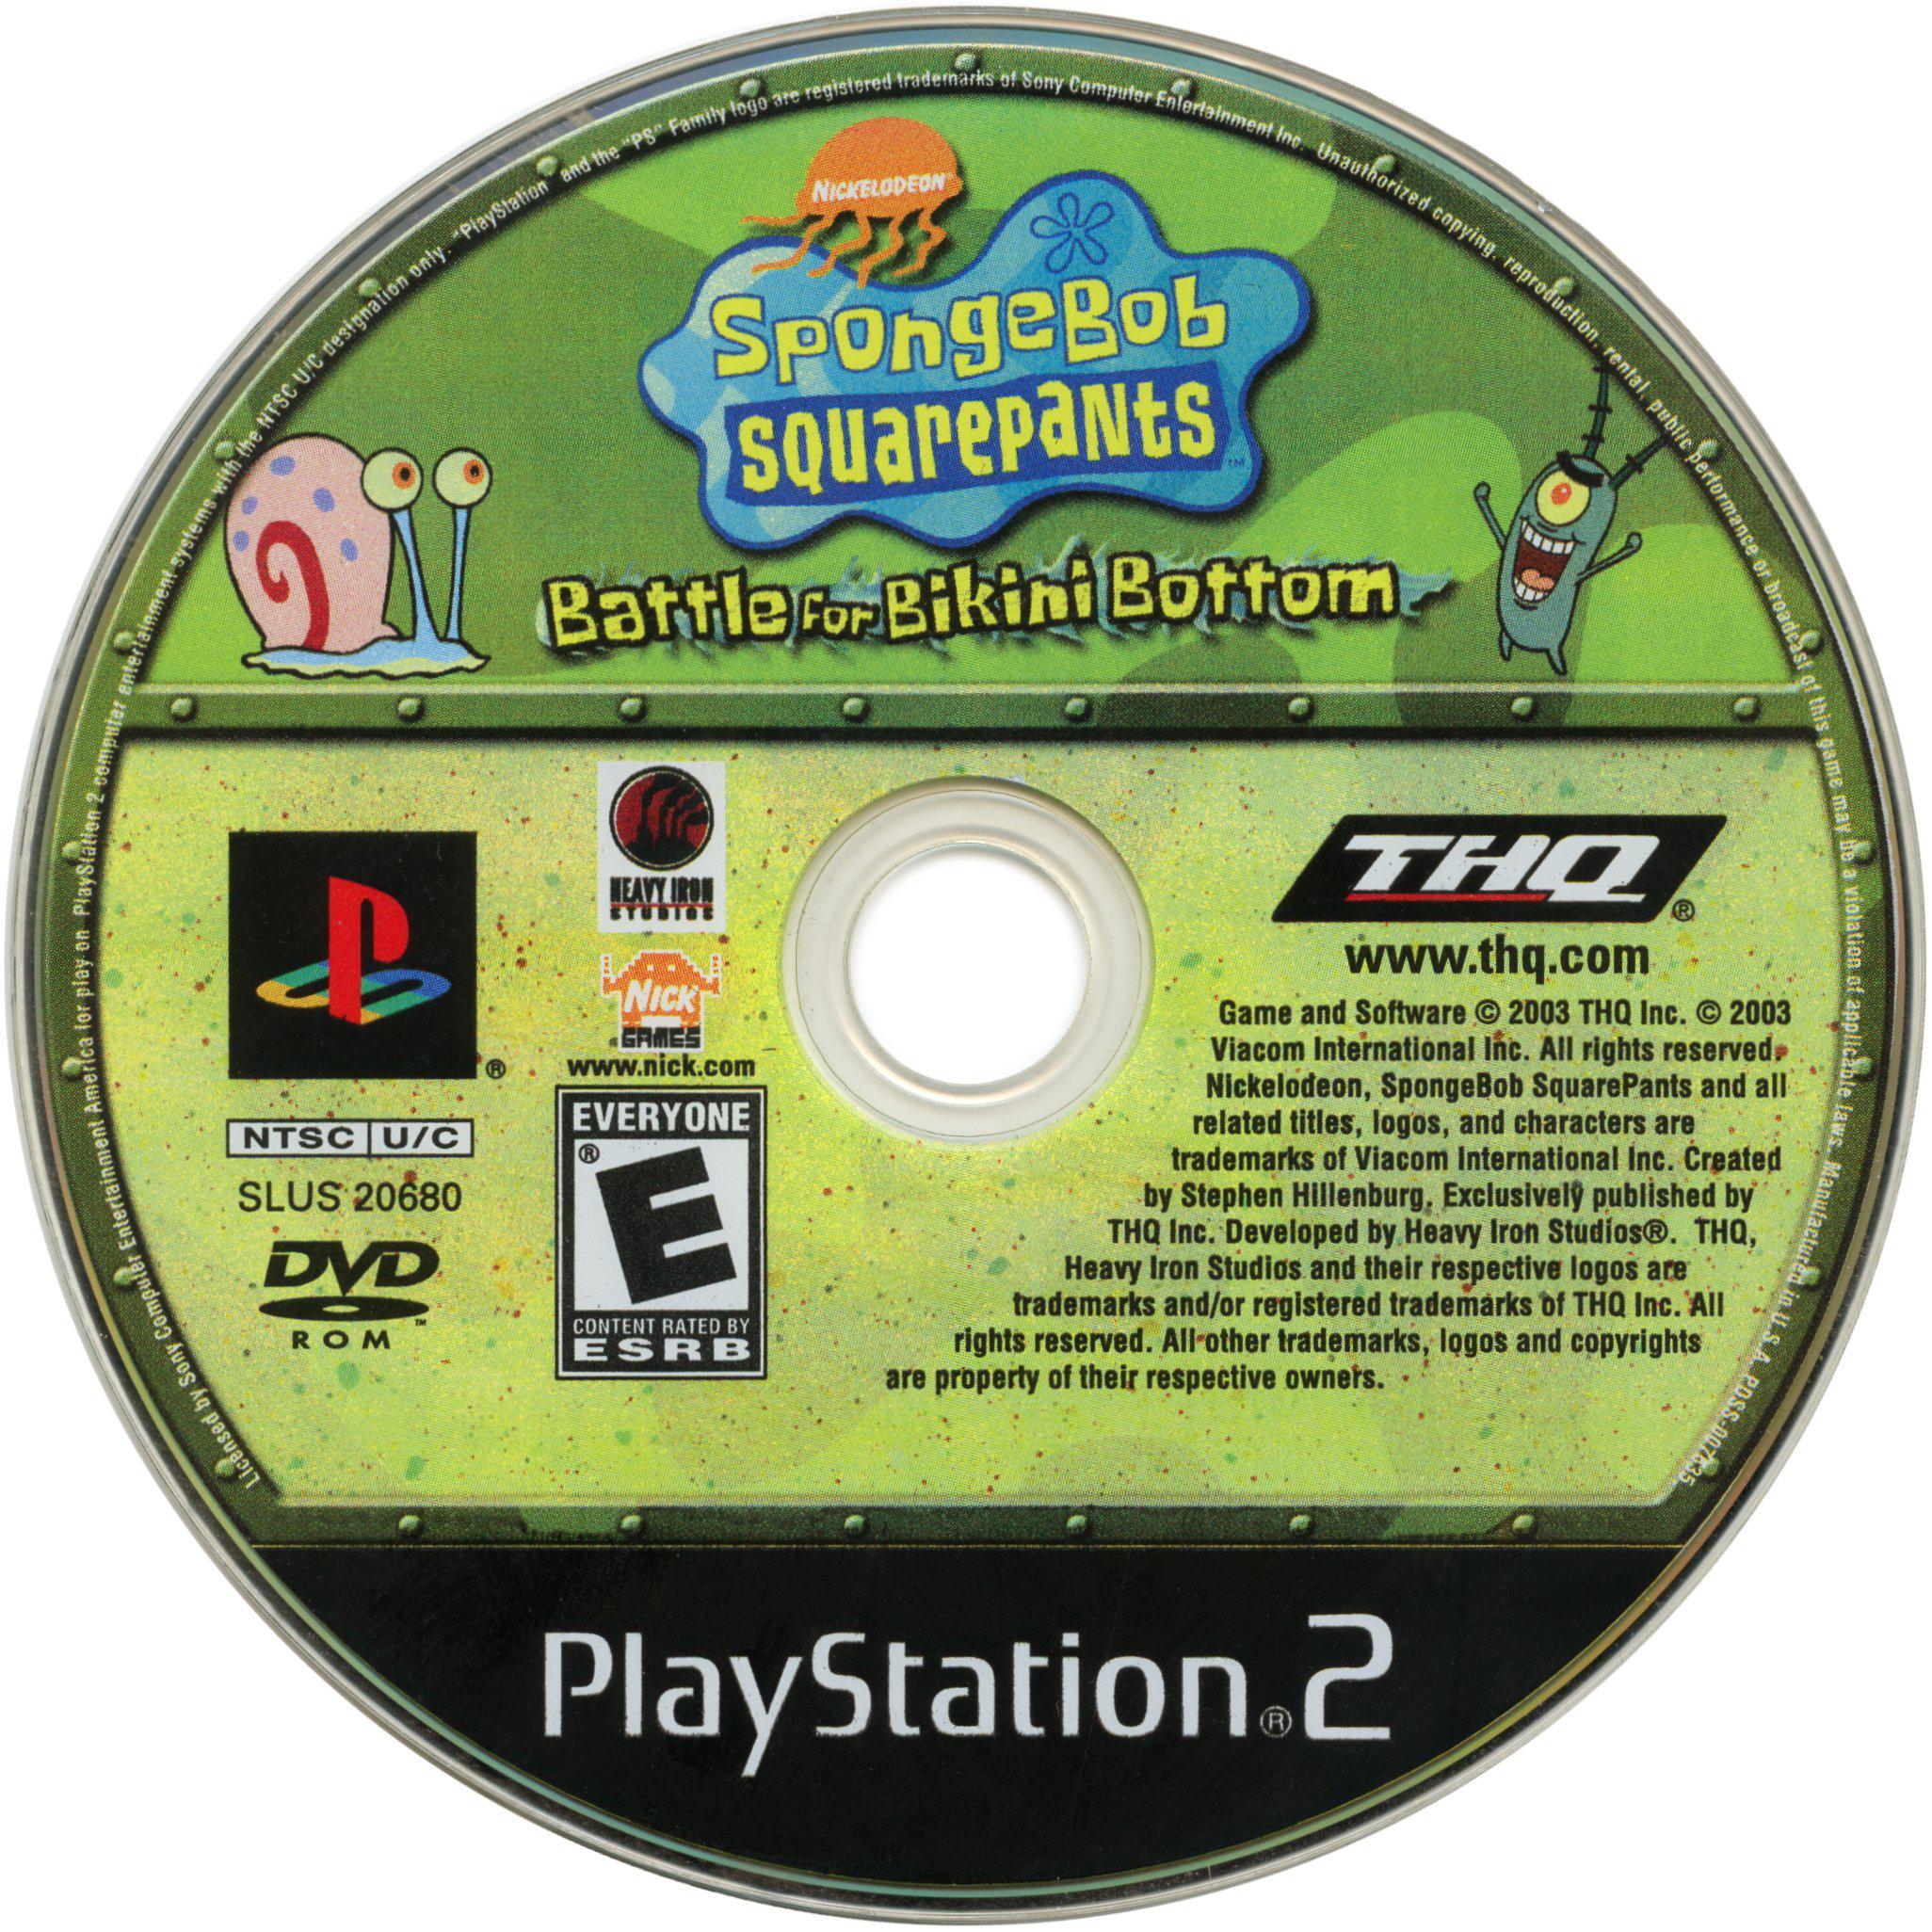 SpongeBob SquarePants: Battle for Bikini Bottom - PlayStation 2 (PS2) Game Complete - YourGamingShop.com - Buy, Sell, Trade Video Games Online. 120 Day Warranty. Satisfaction Guaranteed.